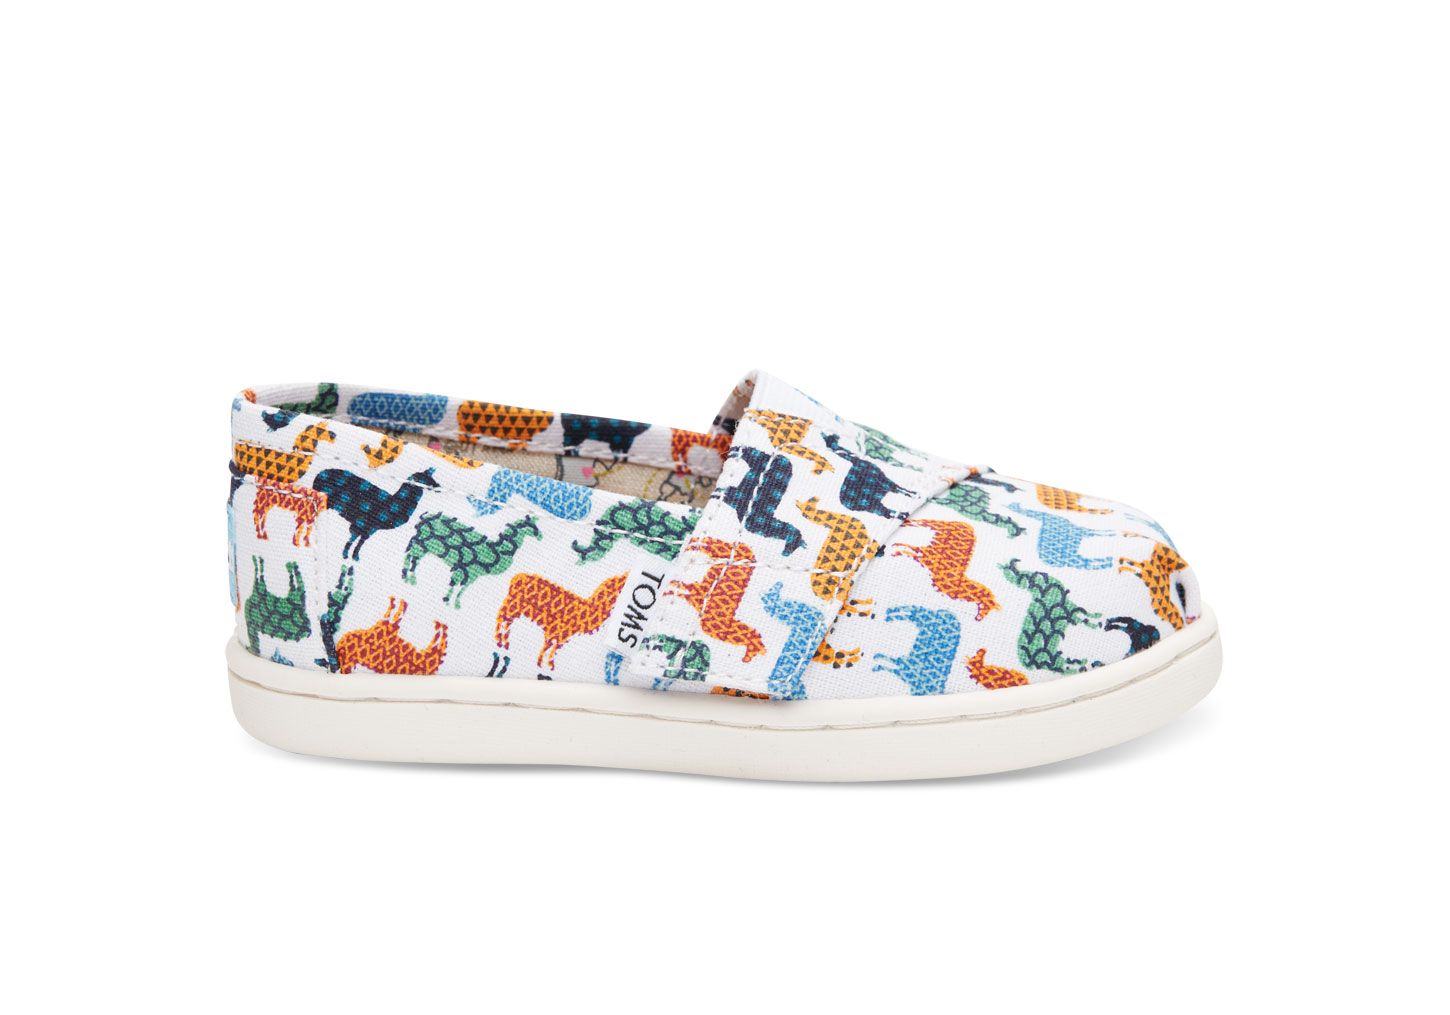 These Llamas Print Canvas Youth Classics give back to the part of the world that inspired them, Peru! | TOMS